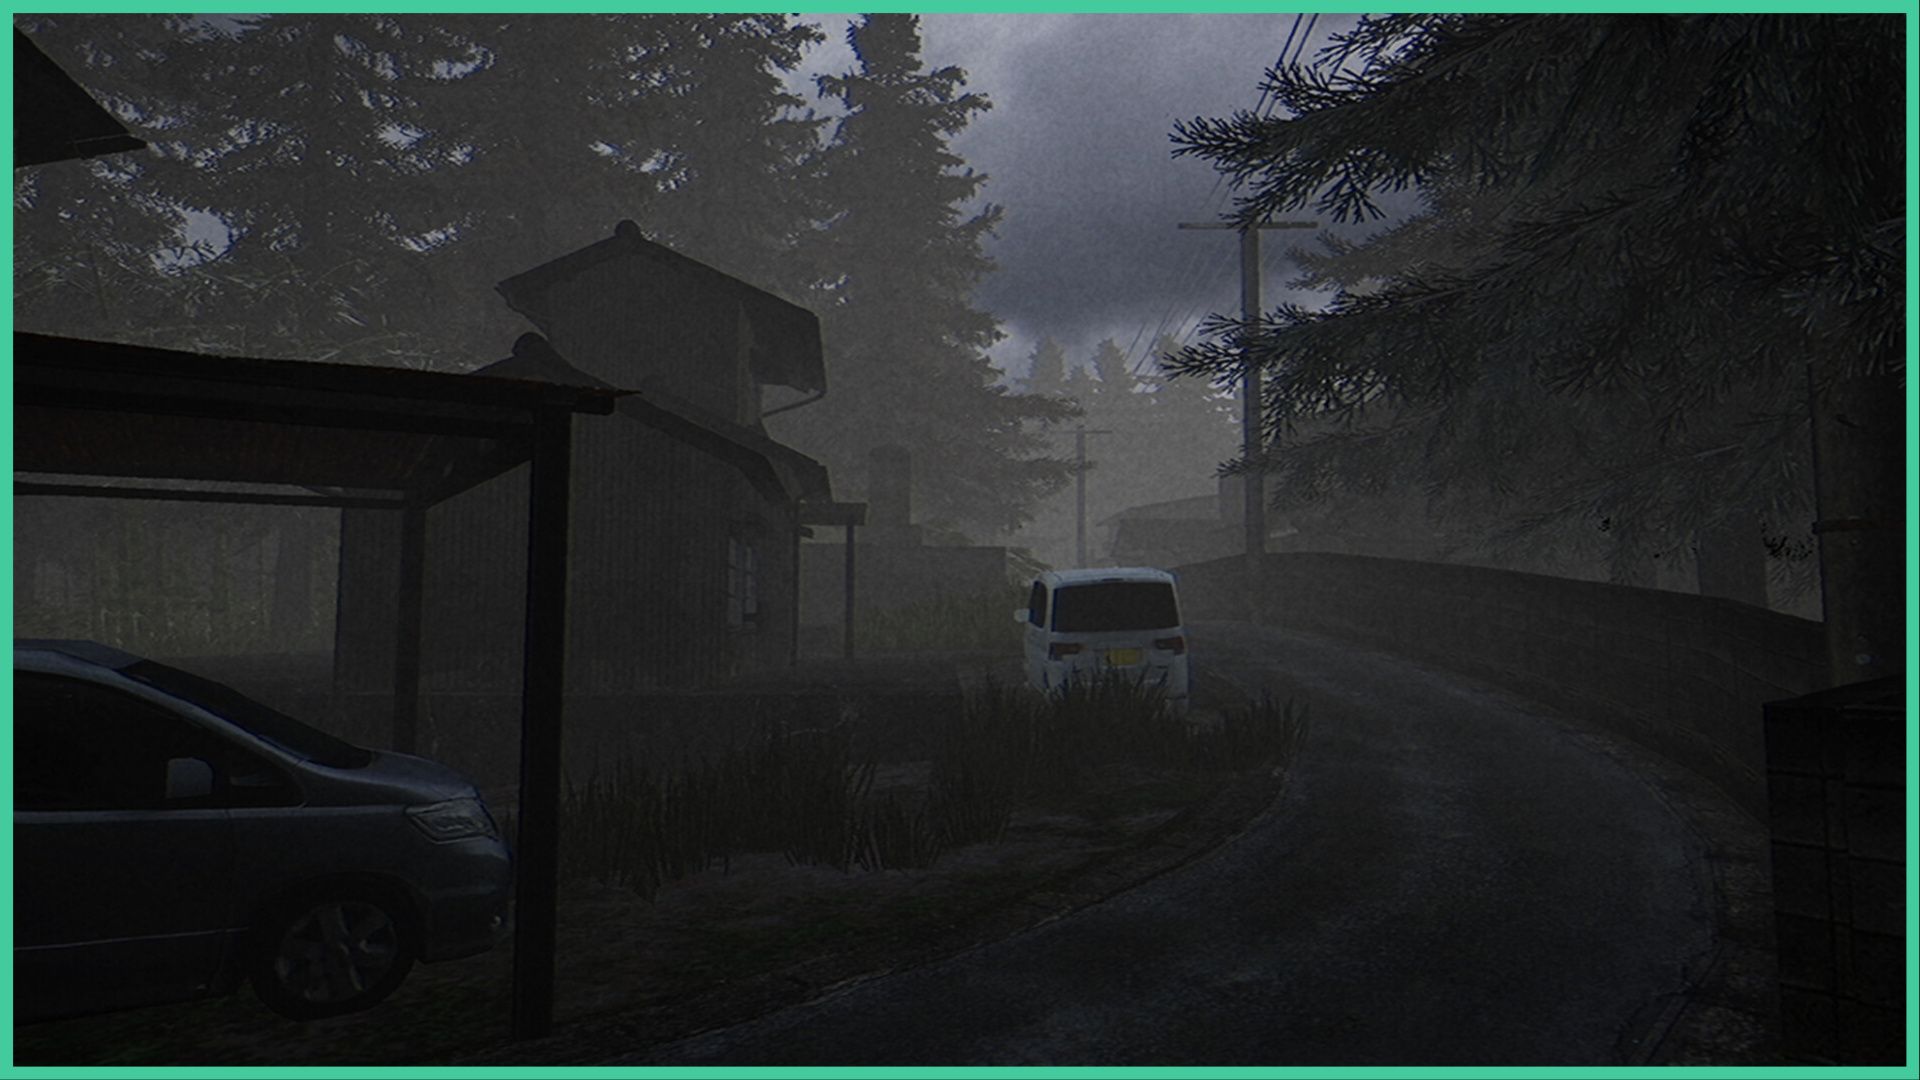 feature image for our chilla's art the kidnap news, the image features a screenshot from the game of a quiet street that turns into a slight hill as the road stretches on, there are two parked cars at two houses to the side, the entire road and pathway is surrounded by tall forest trees, with telephone poles and wires in the distance, it looks like the entire area is covered in fog as the image appears grainy